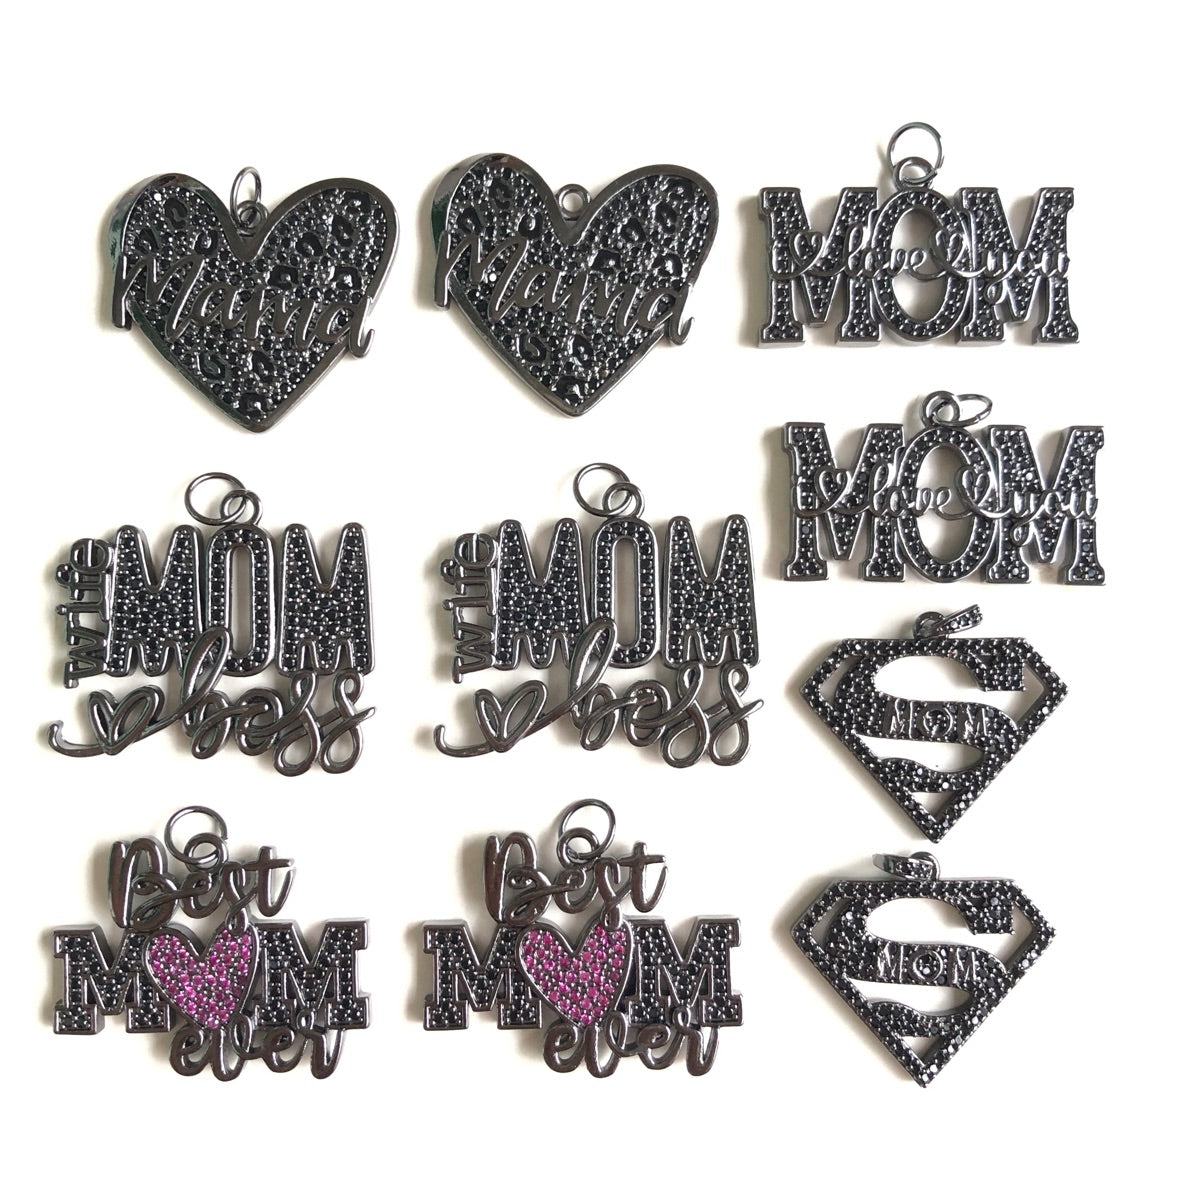 10pcs/lot CZ Pave Mother's Day Charms Bundle 2 Black on Black-10pcs CZ Paved Charms Mix Charms Mother's Day Charms Beads Beyond